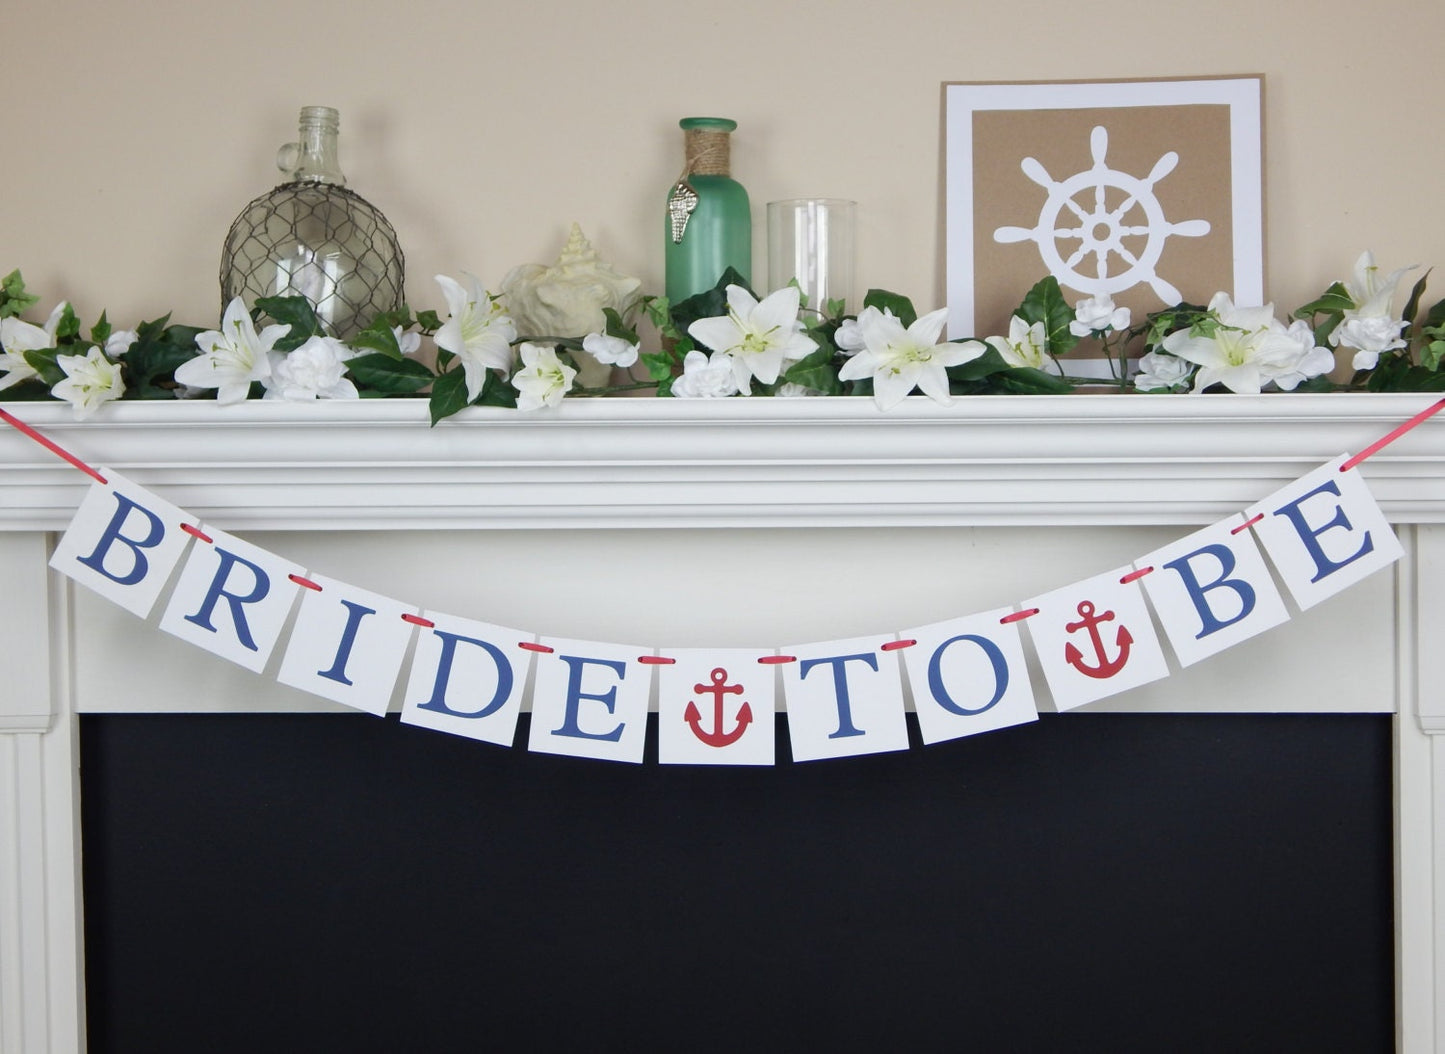 Bride To Be Banner - Nautical - Anchor - Blue and Red